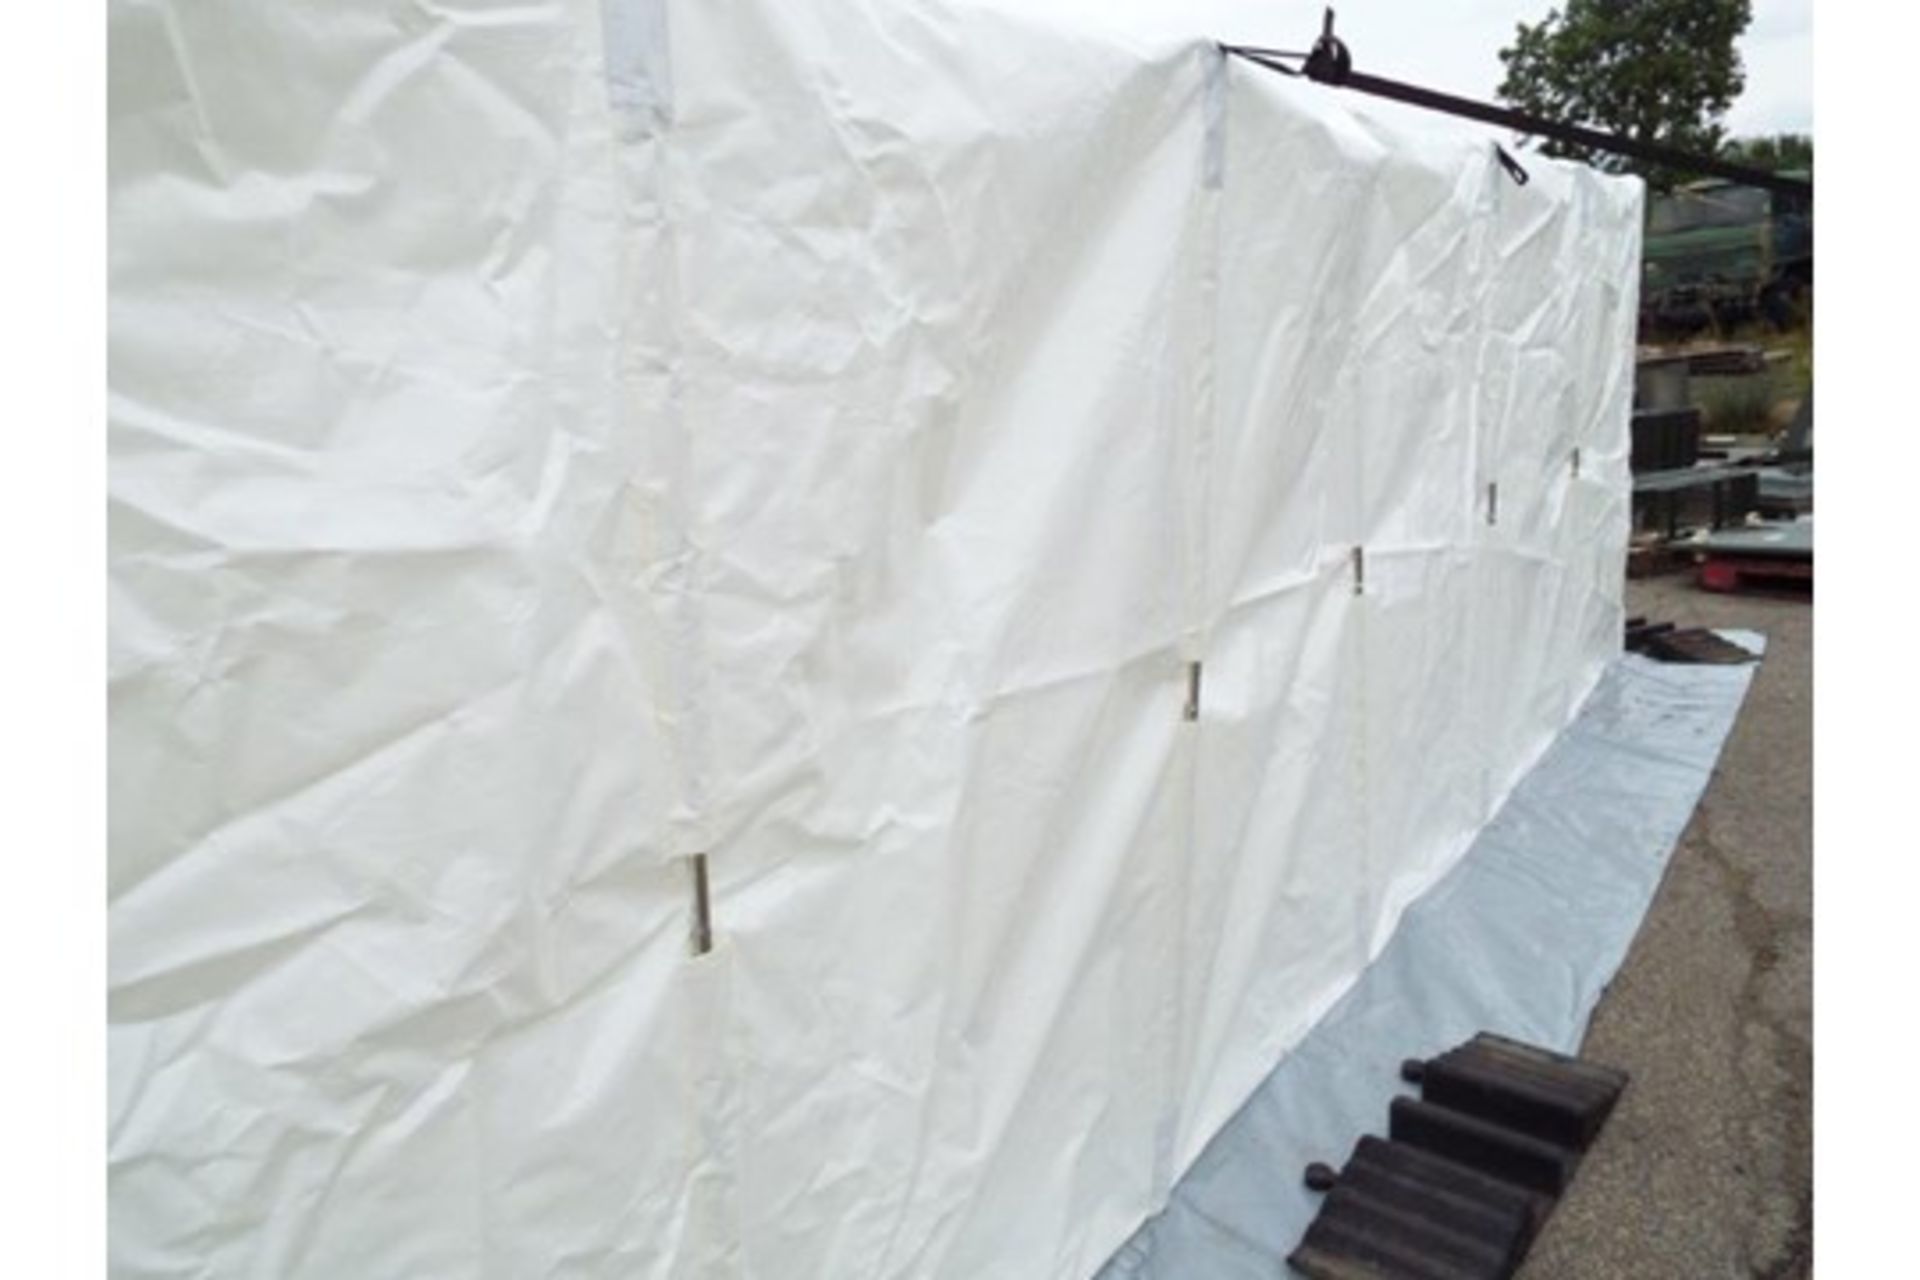 Unissued 8mx4m Inflateable Decontamination/Party Tent - Image 5 of 14